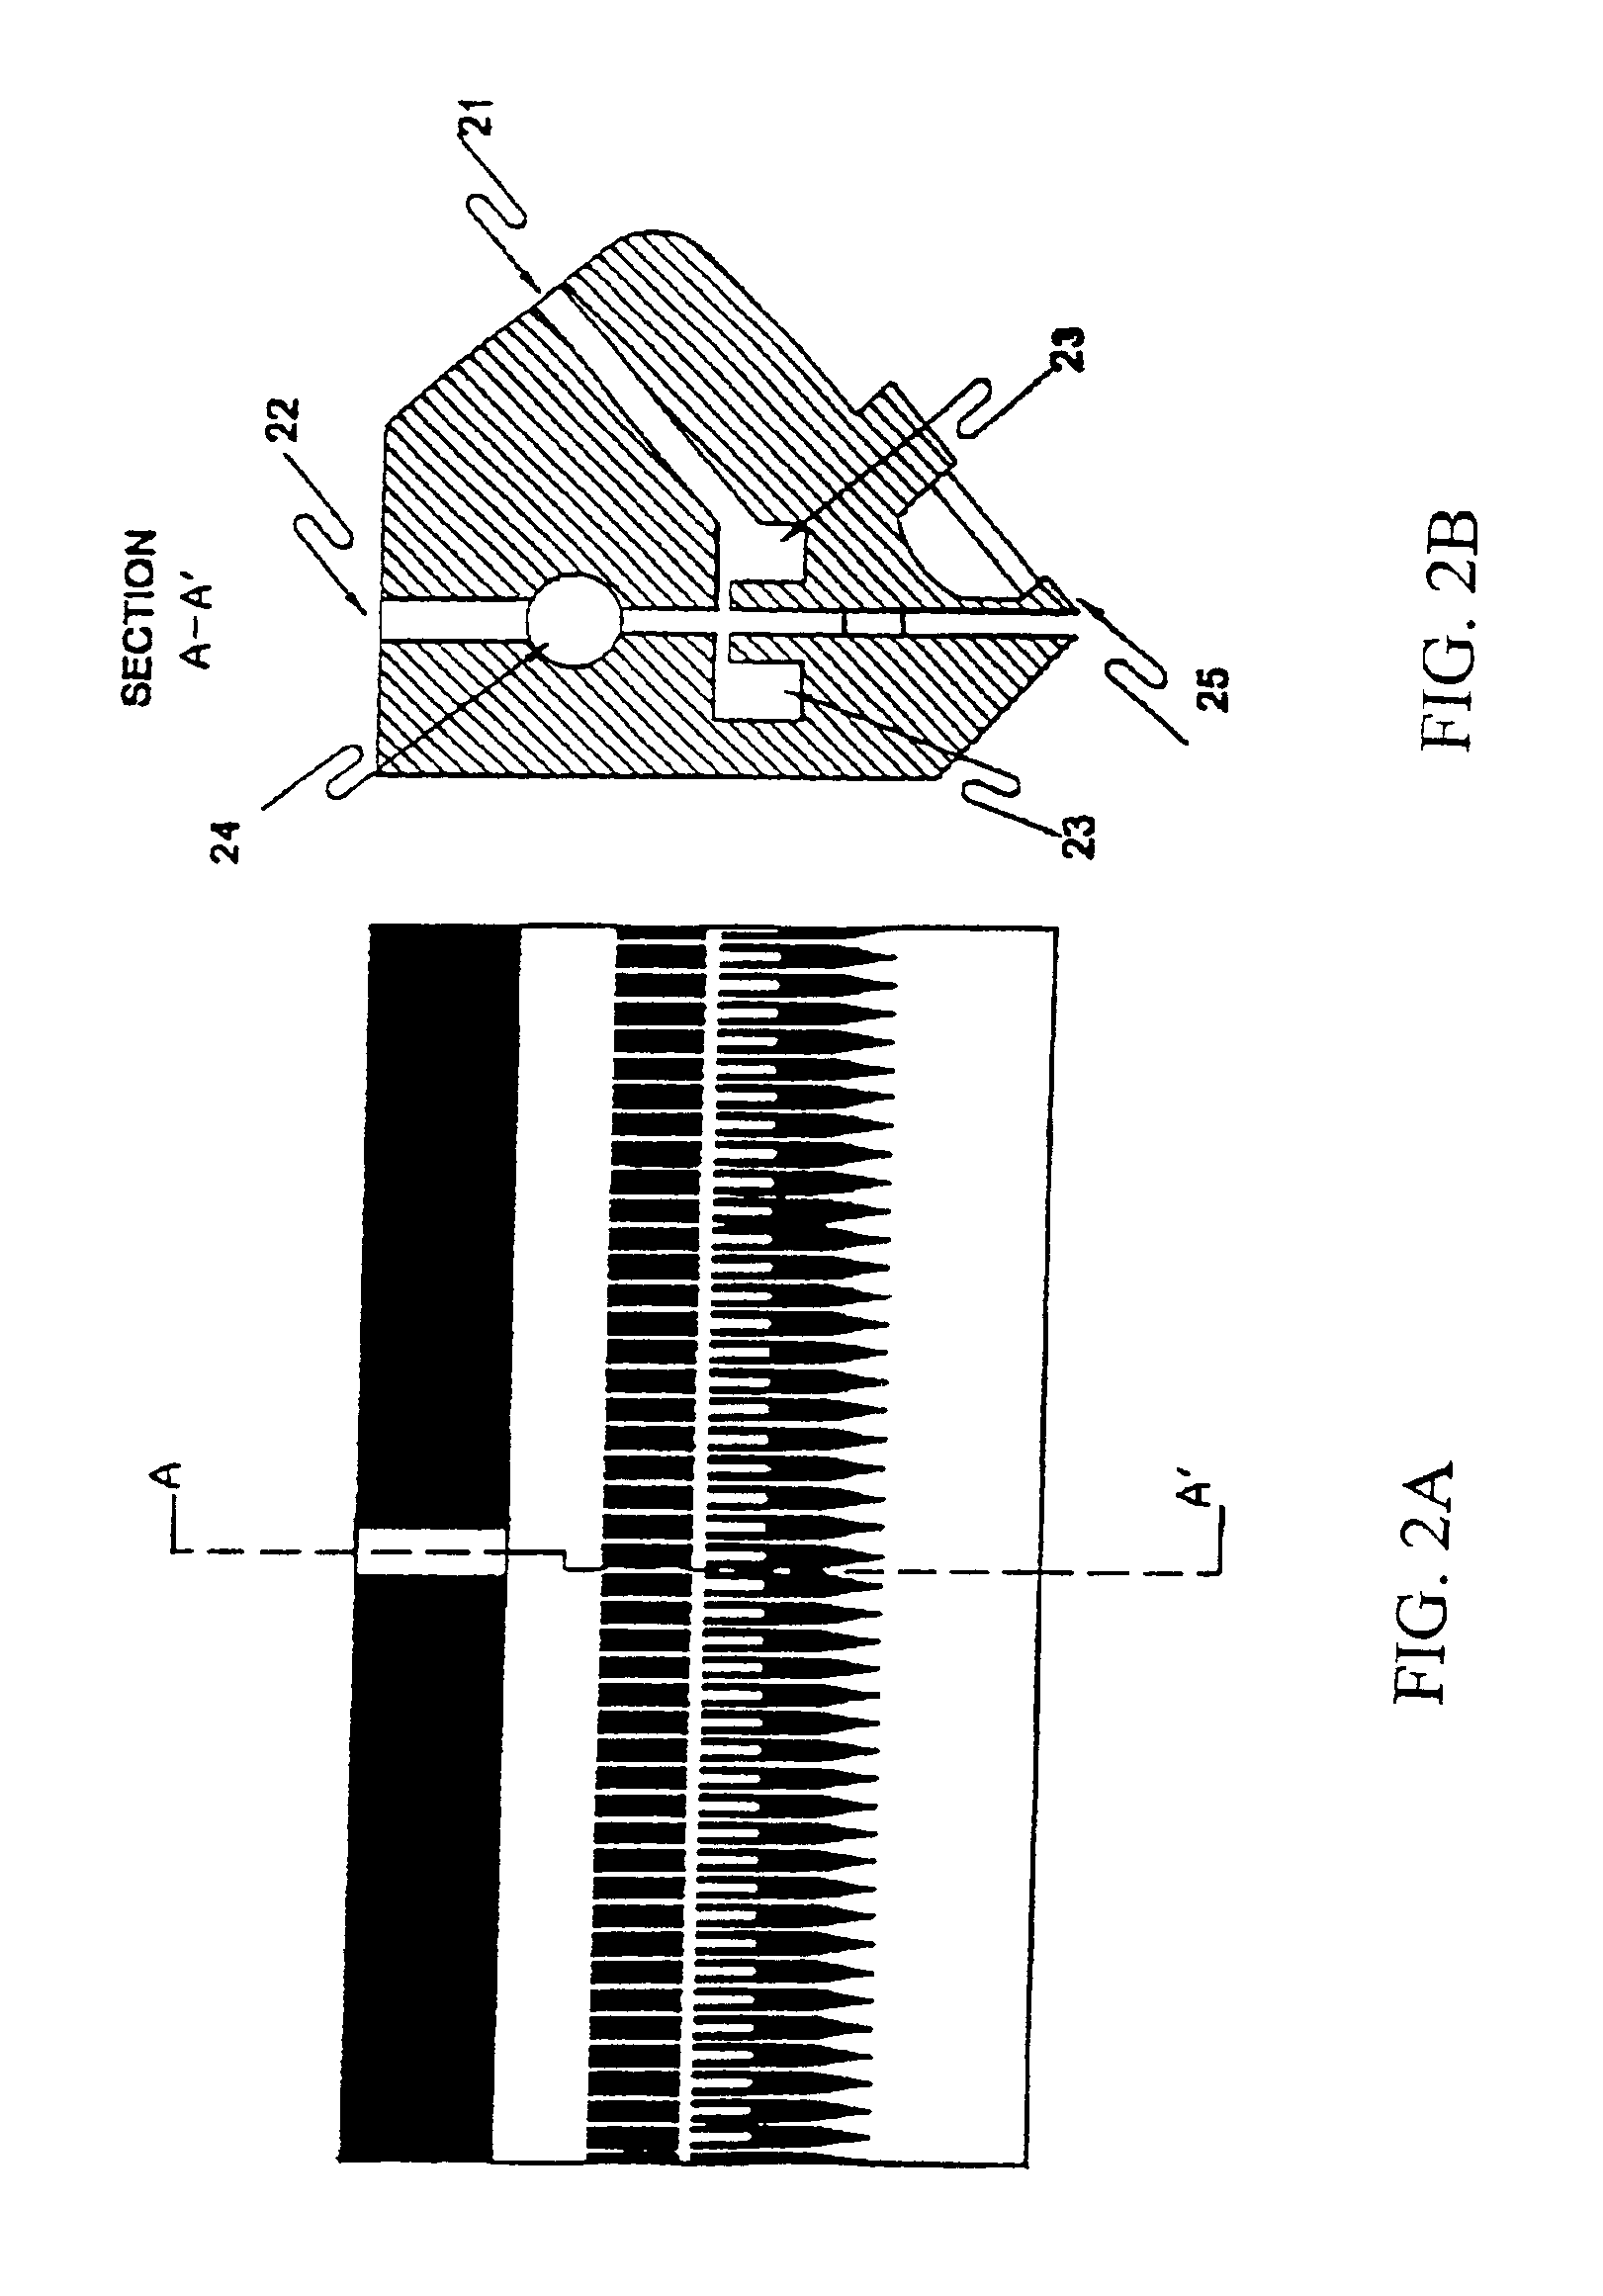 Method and apparatus for fabrication of plastic fiber optic block materials and large flat panel displays